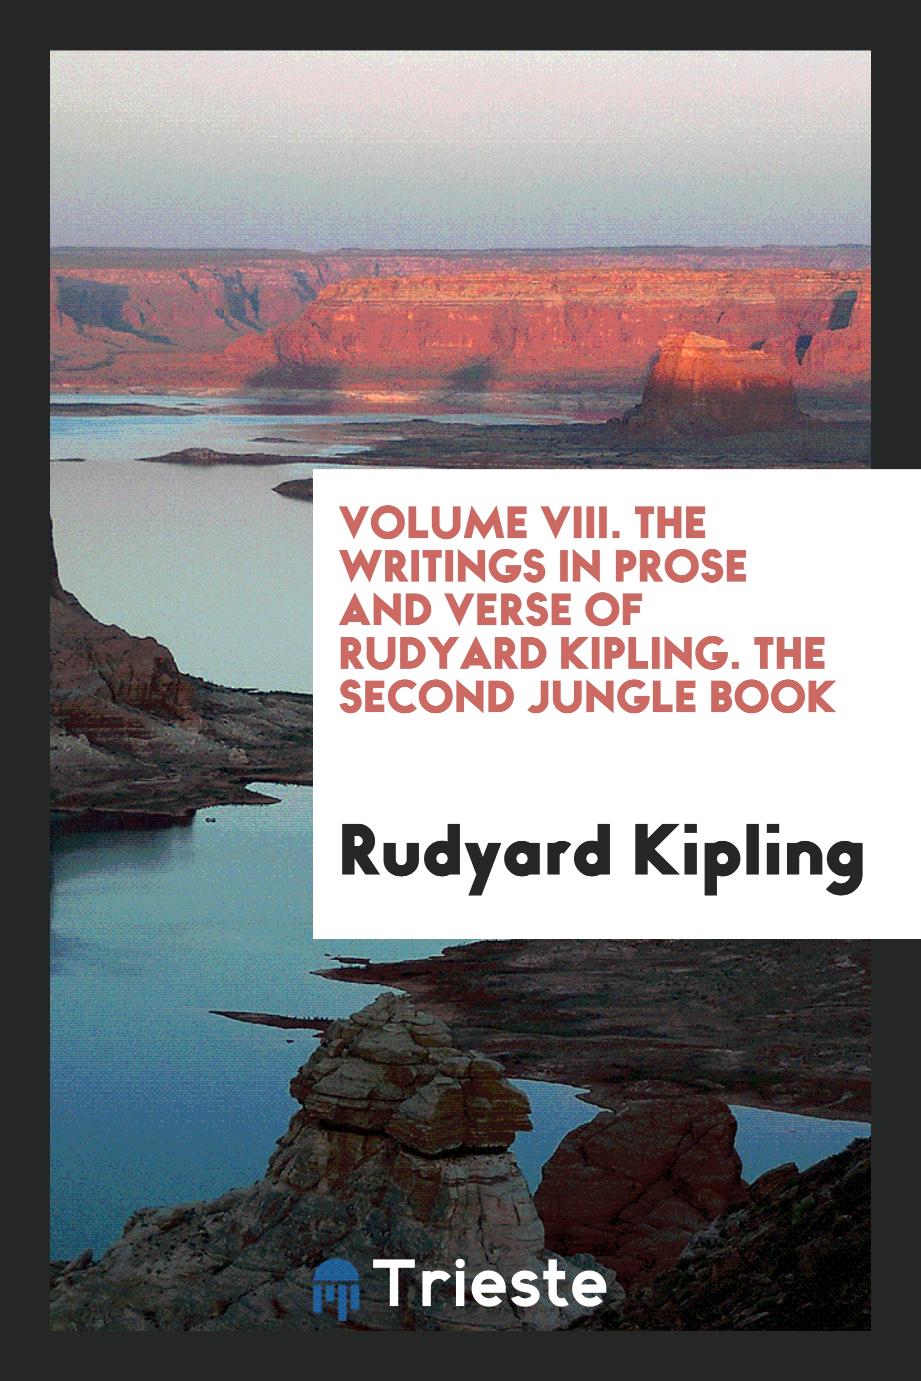 Volume VIII. The Writings in Prose and Verse of Rudyard Kipling. The Second Jungle Book